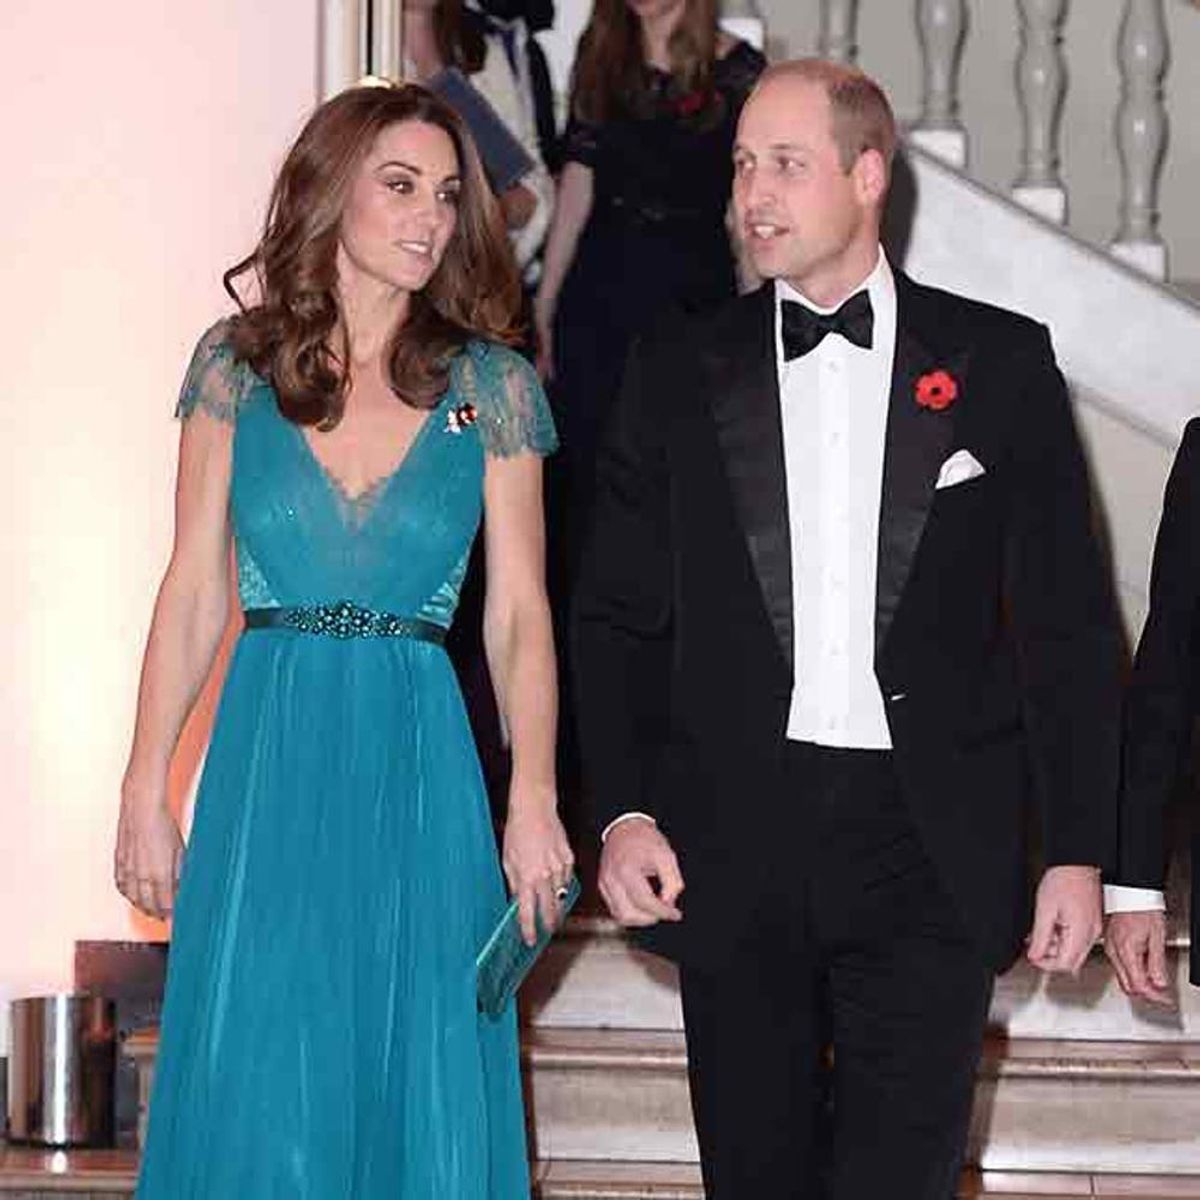 Kate Middleton Just Re-Wore a Jenny Packham Gown from 2012